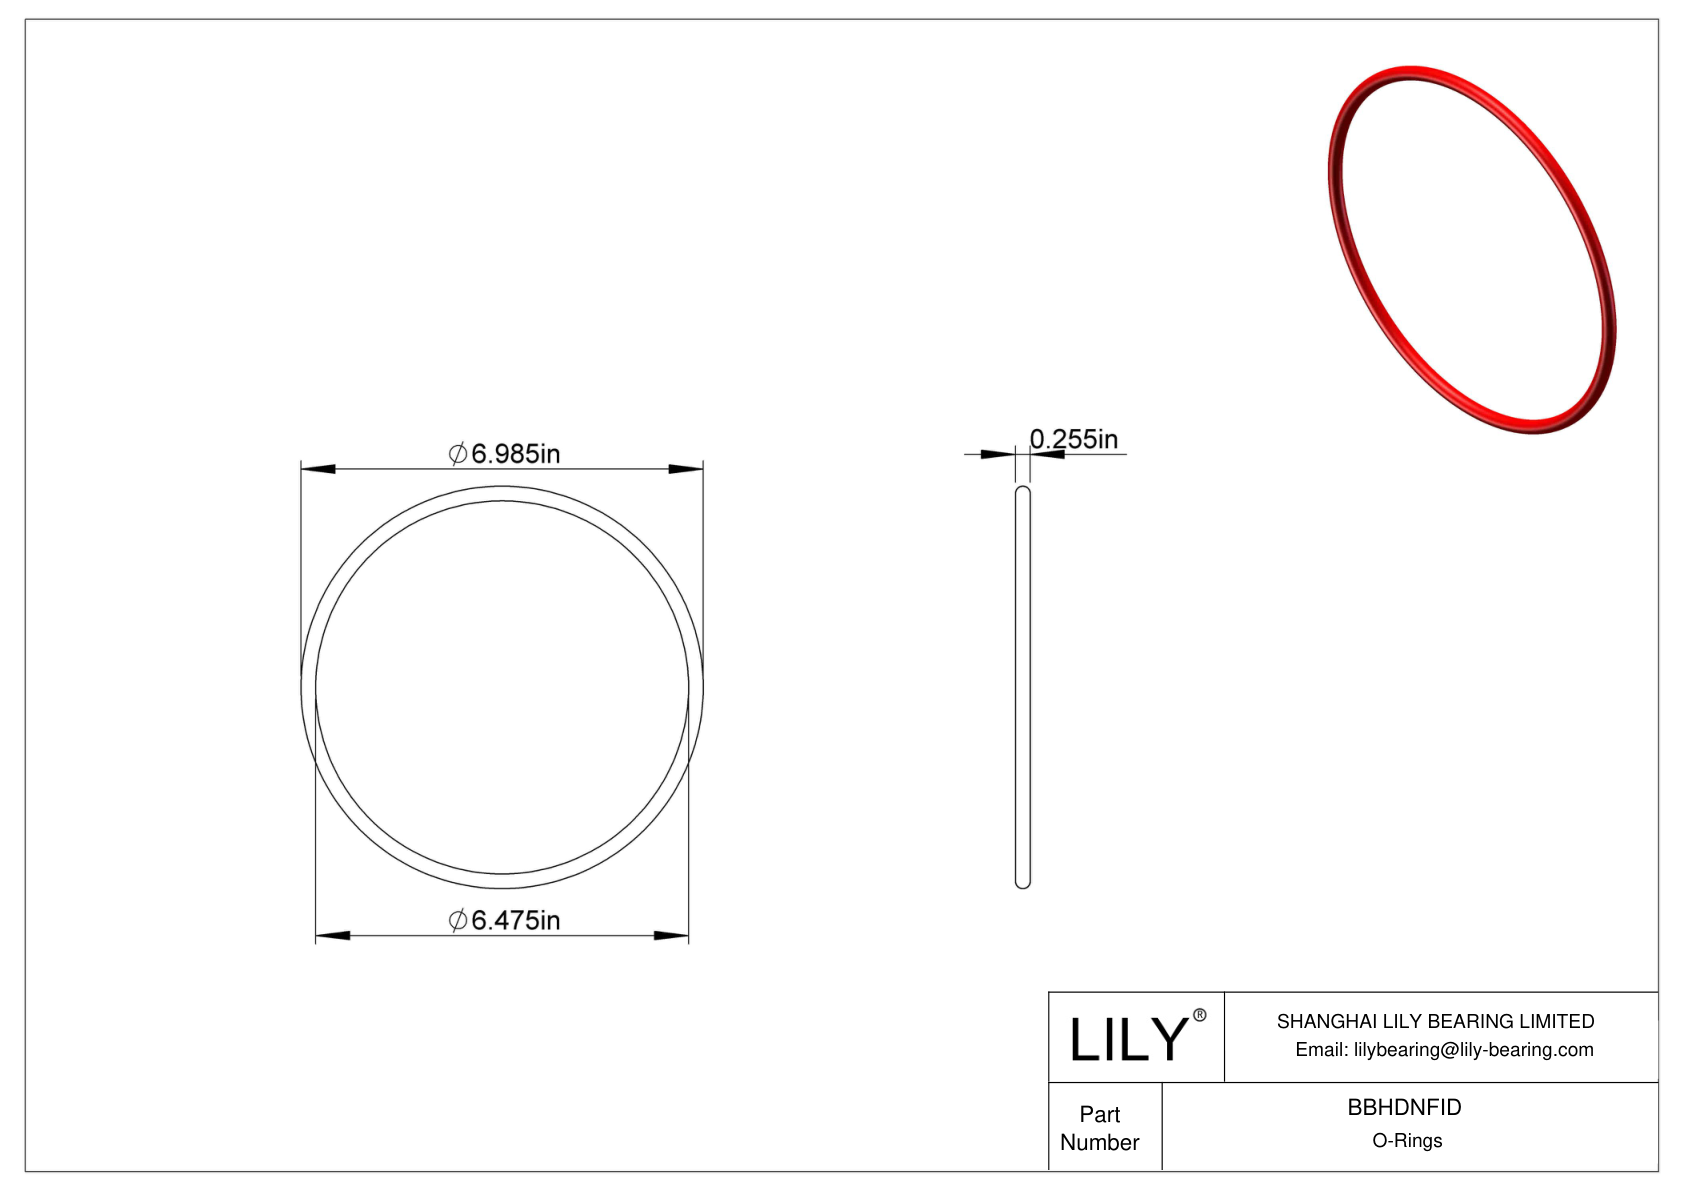 BBHDNFID High Temperature O-Rings Round cad drawing